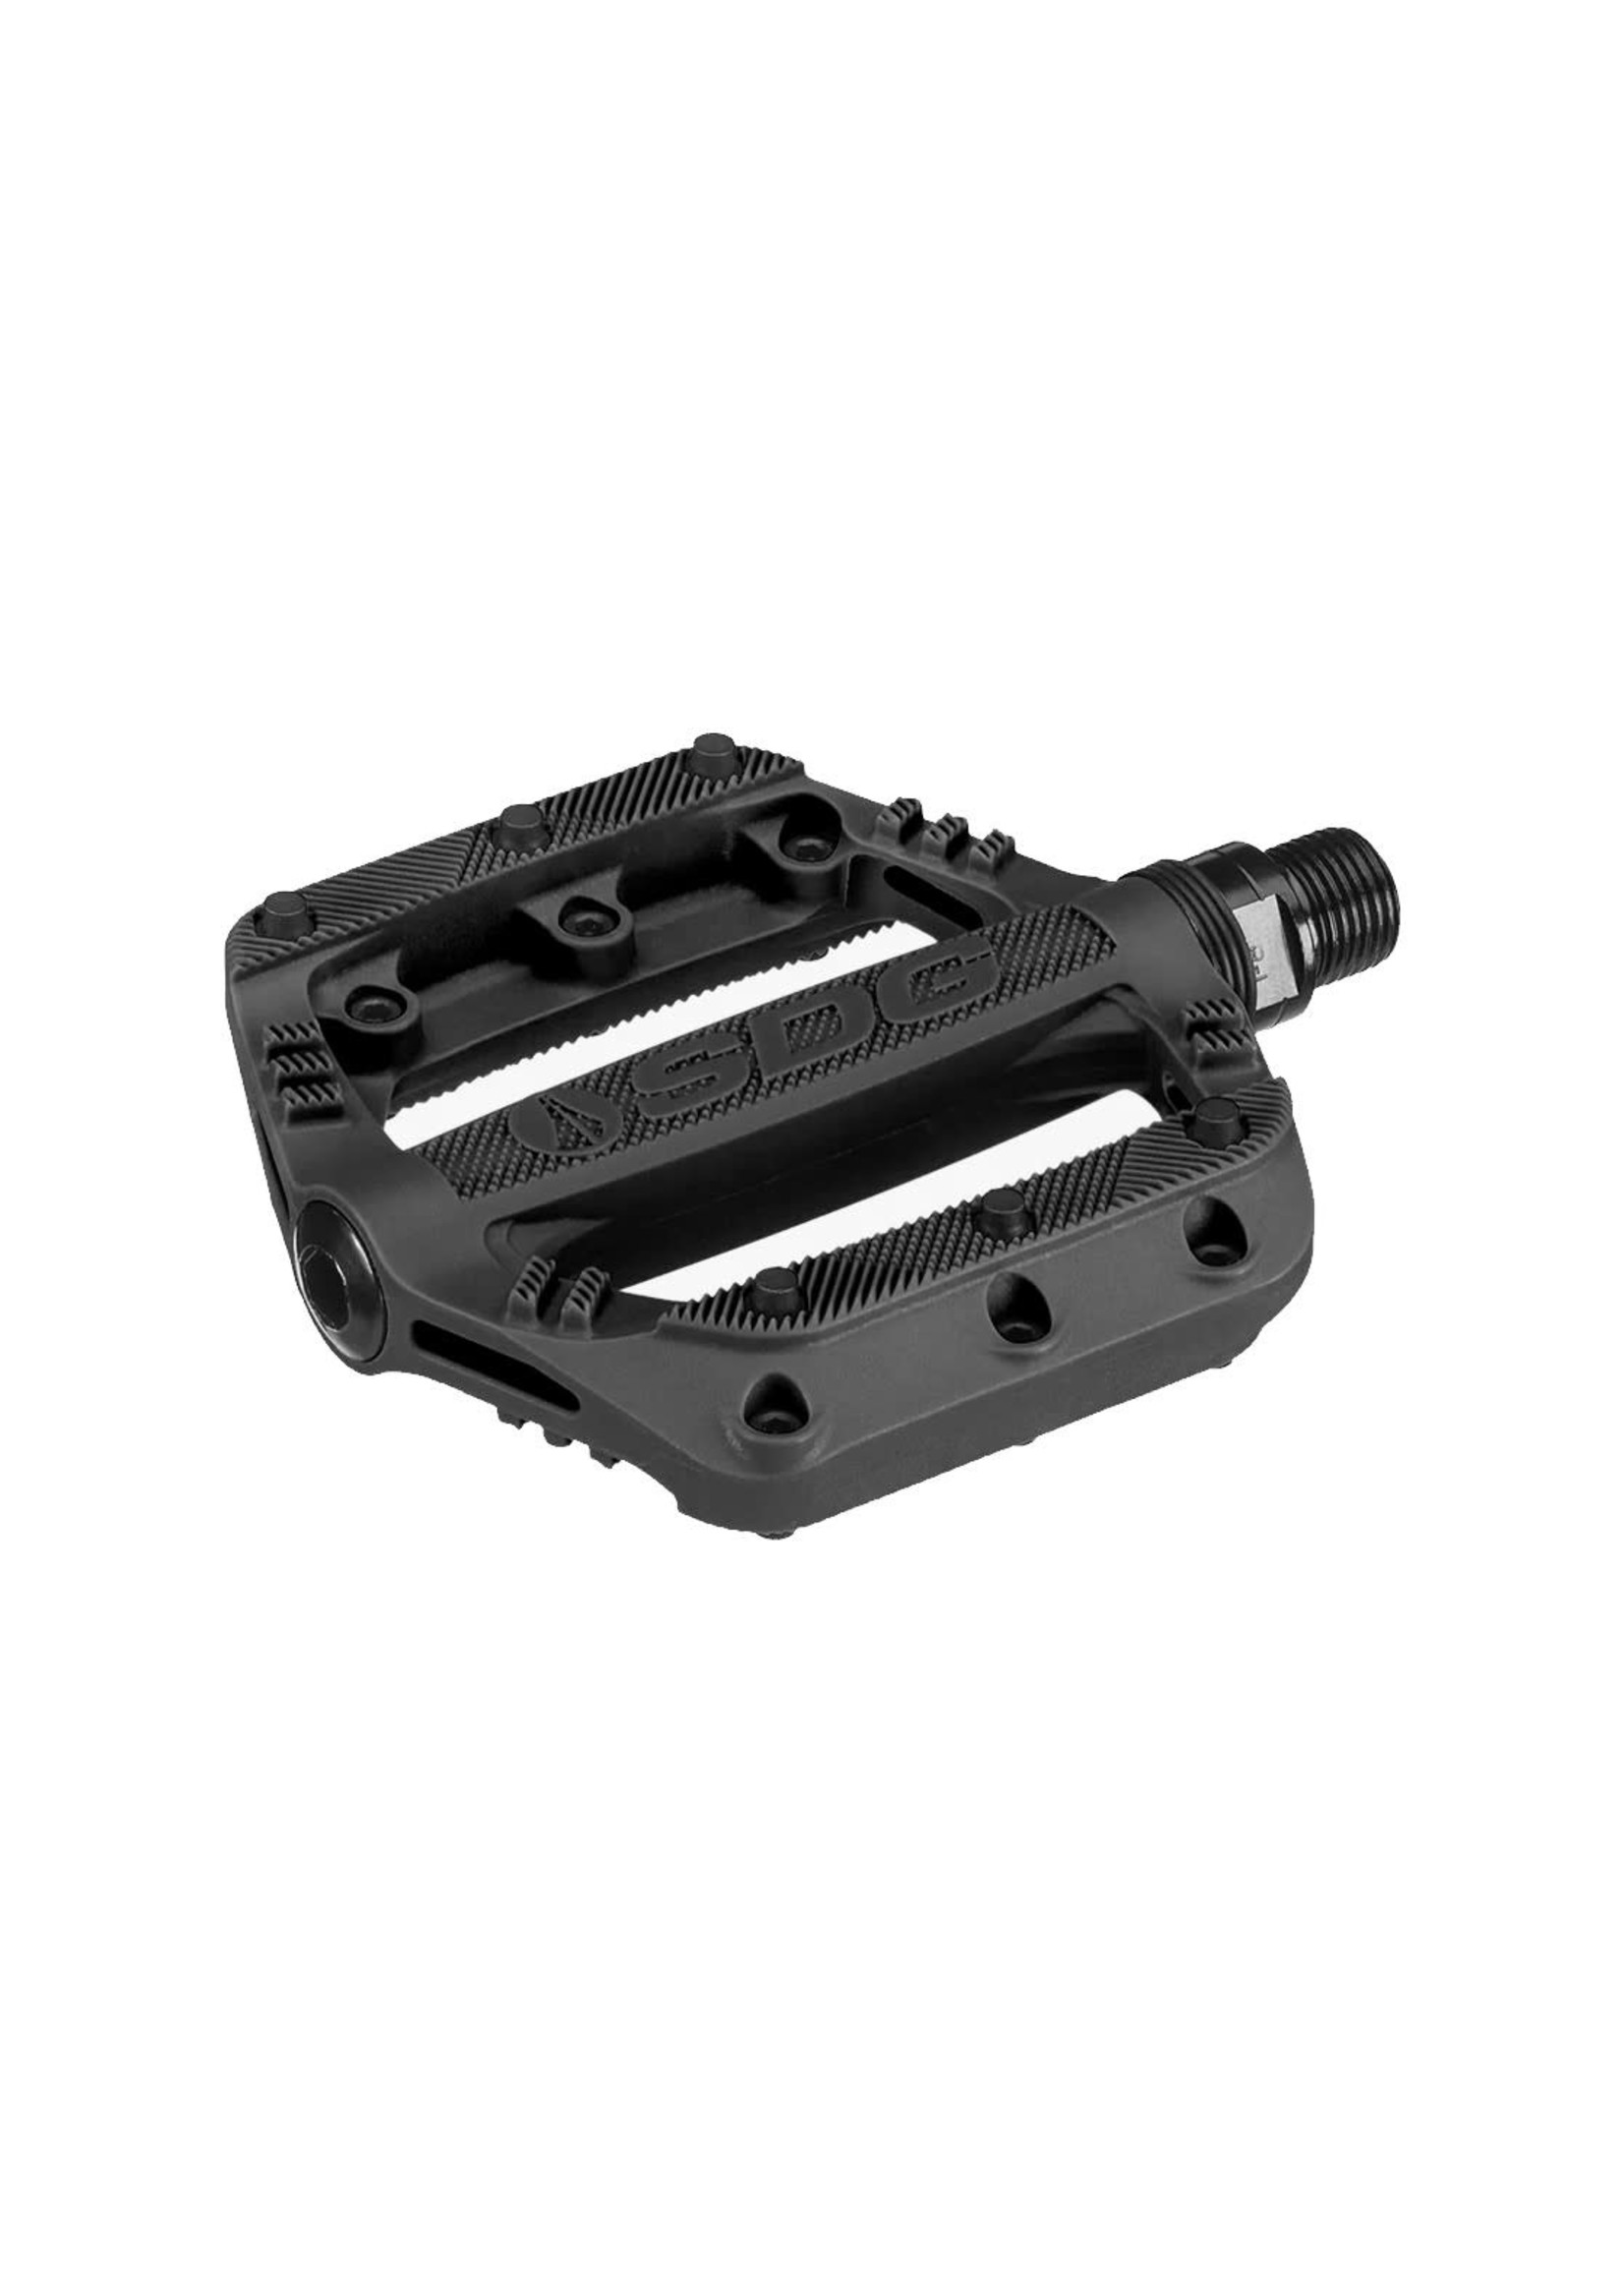 SDG Components Slater, Youth Flat Pedal 9/16" Black